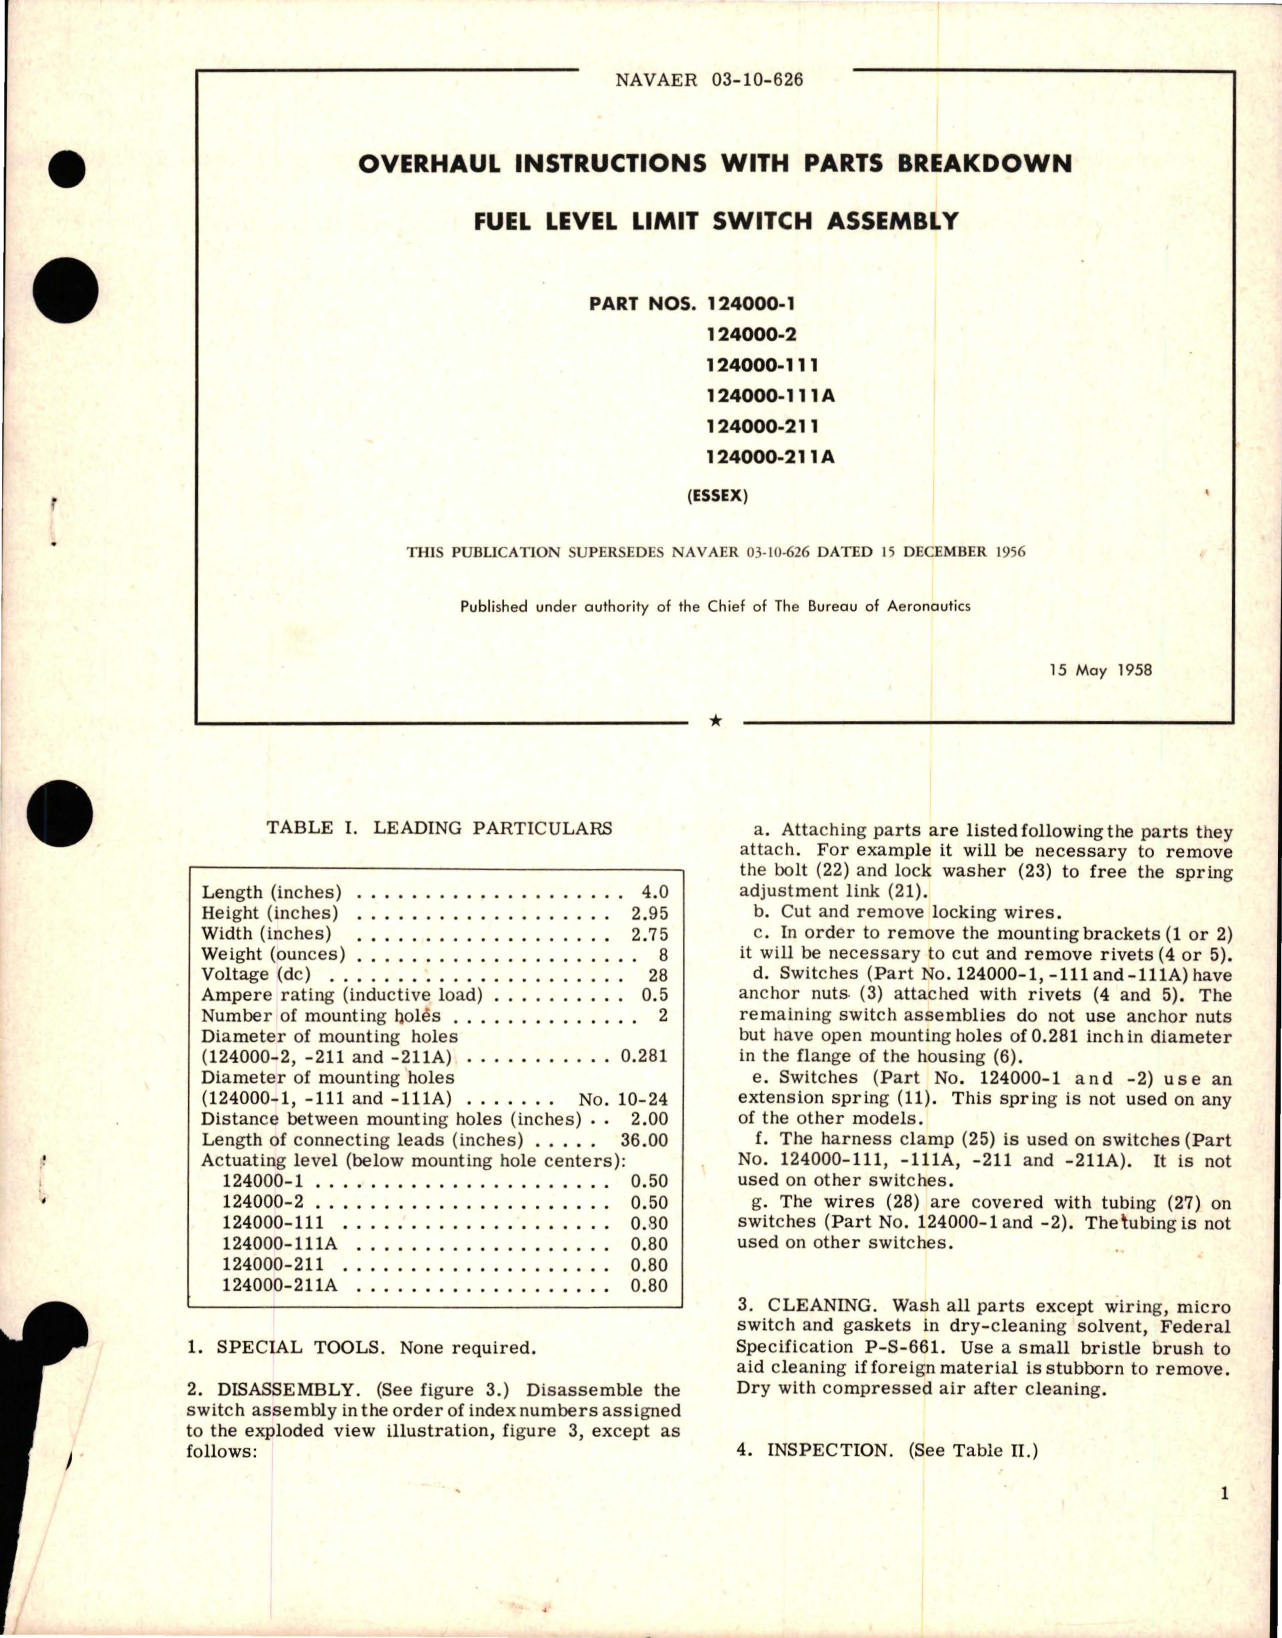 Sample page 1 from AirCorps Library document: Overhaul Instructions with Parts Breakdown for Fuel Level Limit Switch Assembly